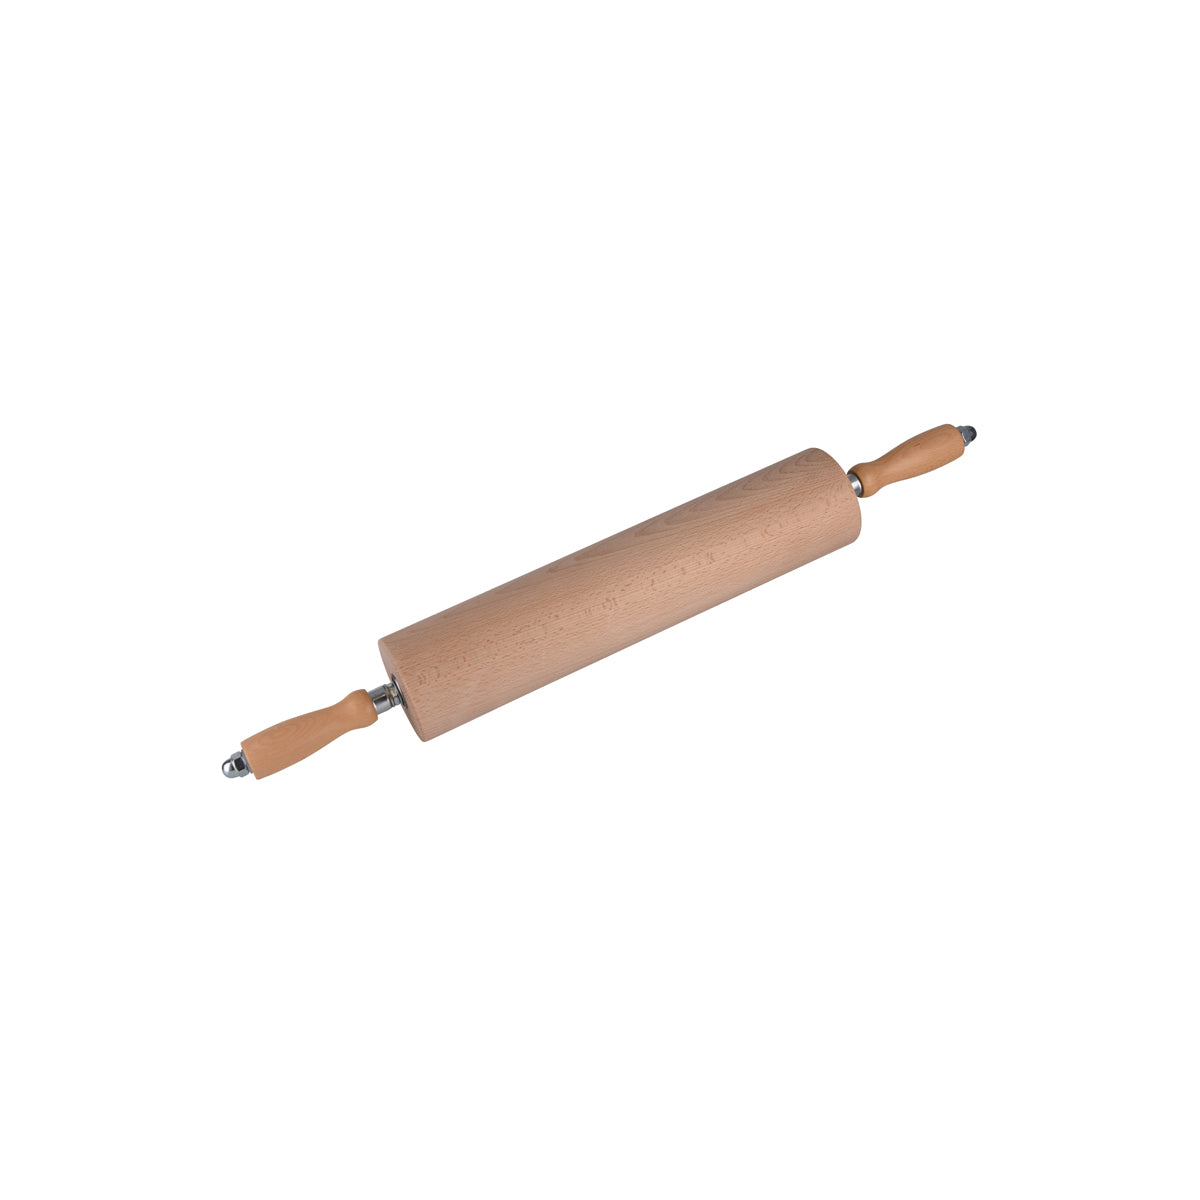 31151 Thermohauser Rolling Pin Wood 400x90mm Tomkin Australia Hospitality Supplies